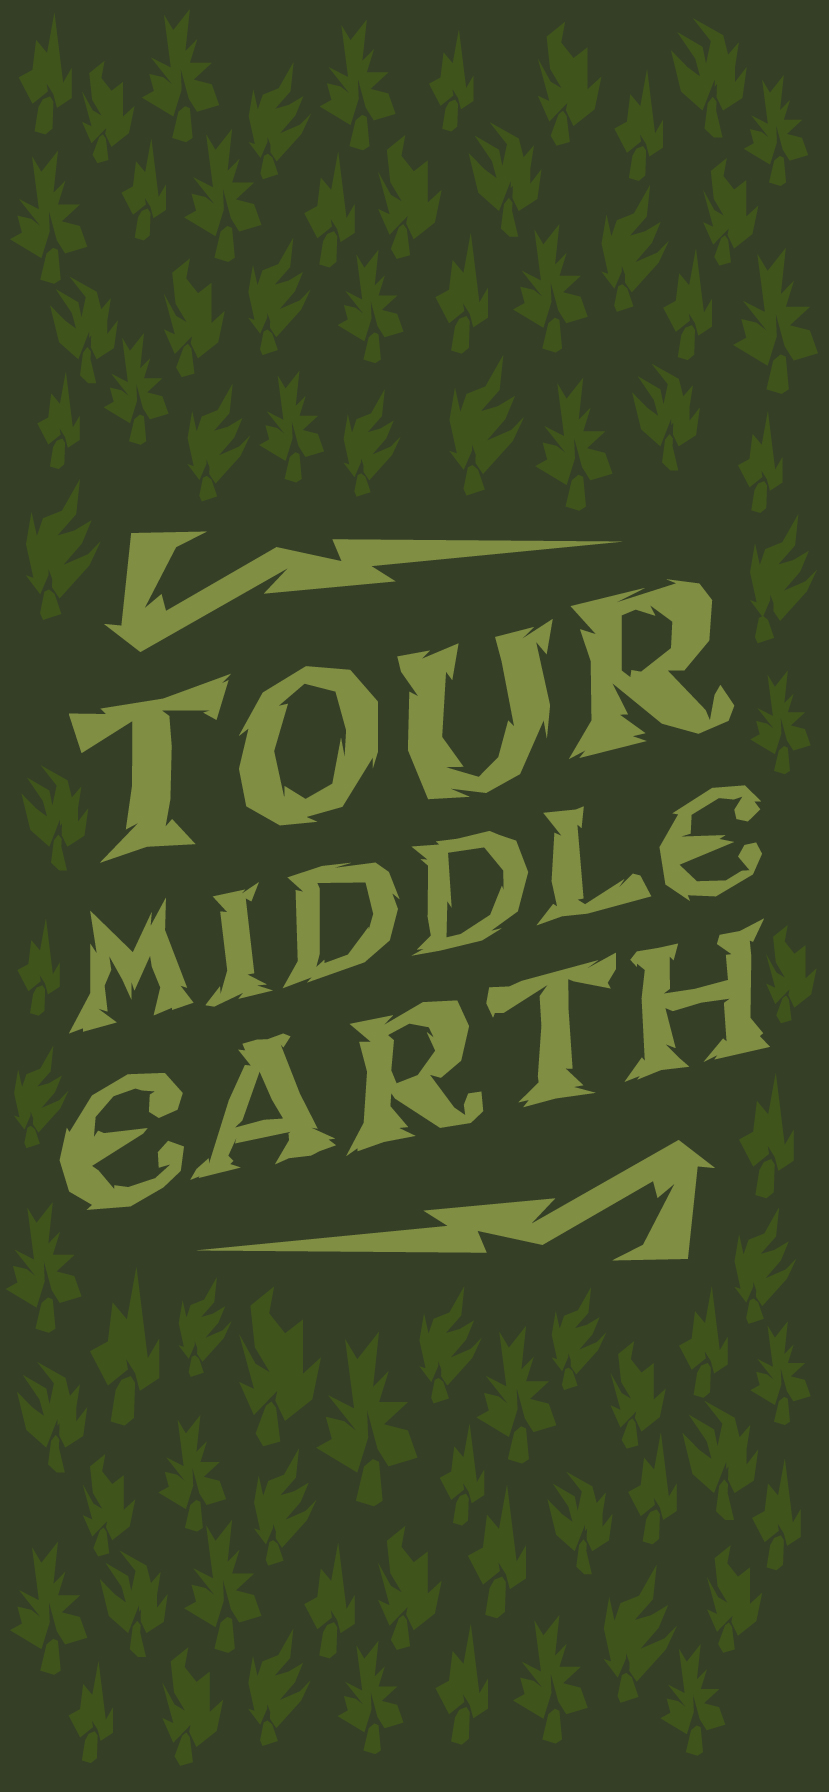 Phone wallpaper of trees pattern and Tour Middle Earth logo